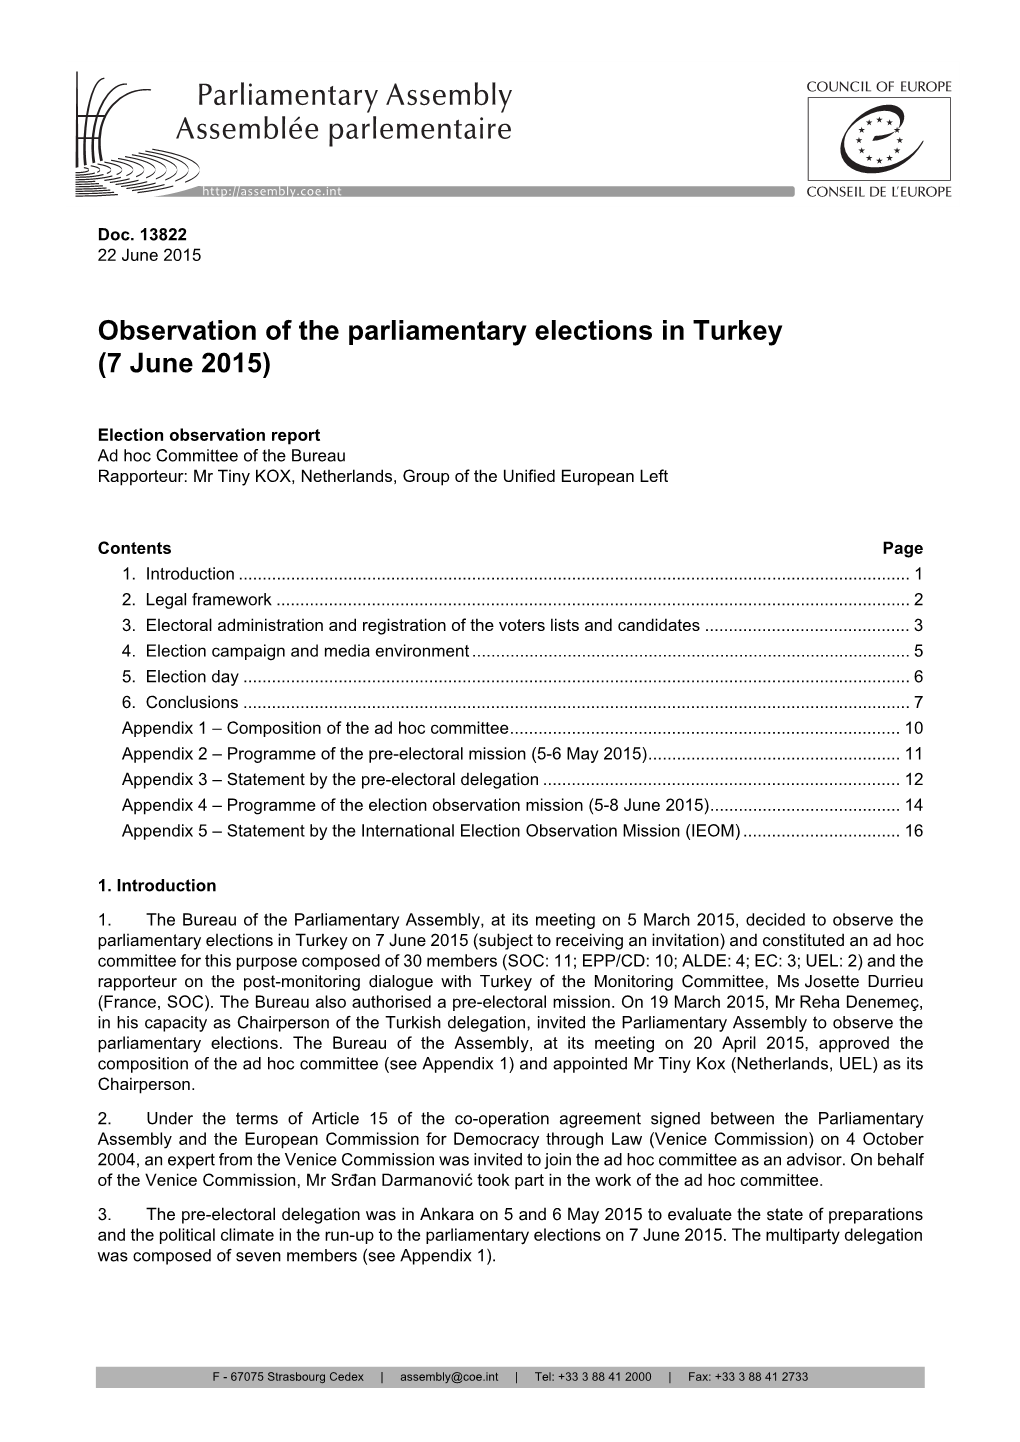 Observation of the Parliamentary Elections in Turkey (7 June 2015)